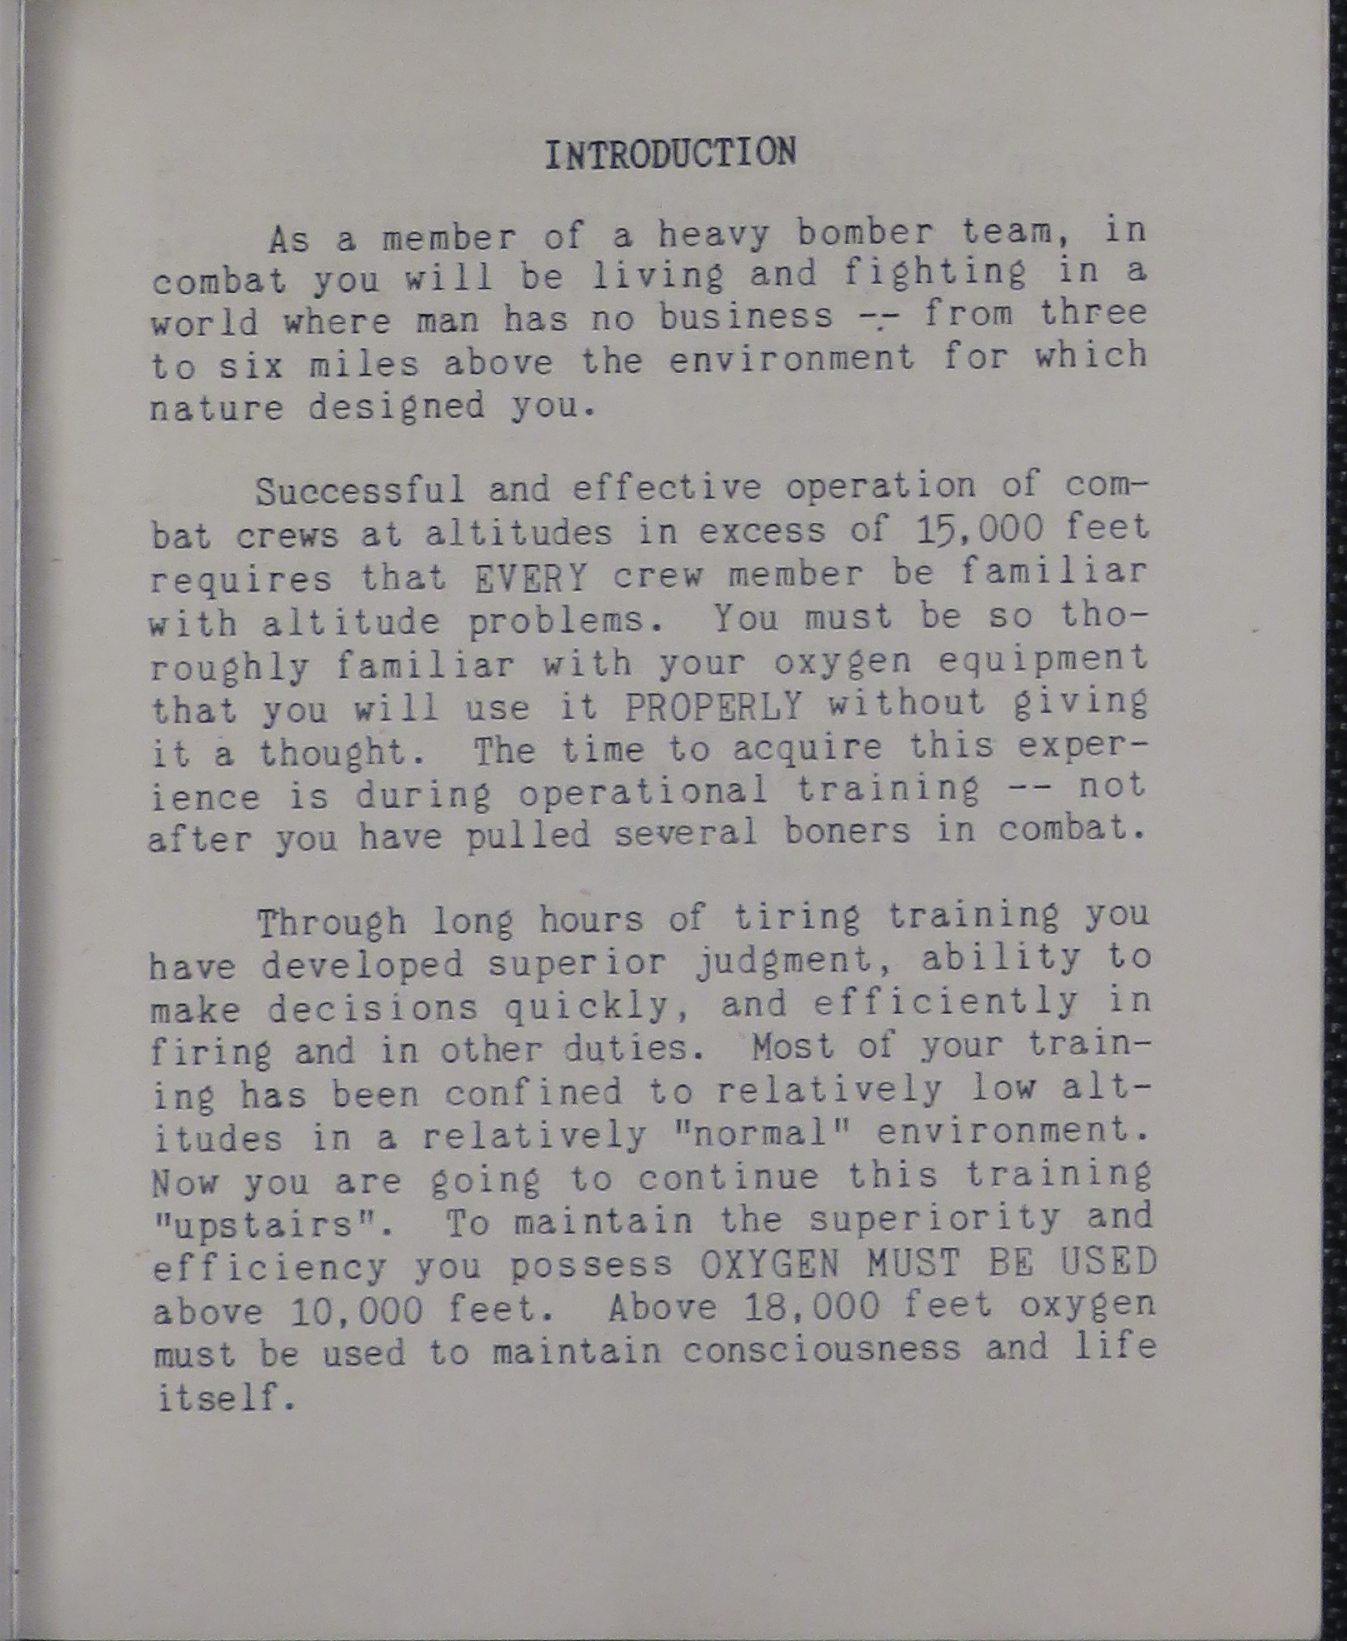 Sample page 7 from AirCorps Library document: Survival at Altitude for Heavy and Very Heavy Bomber Crews